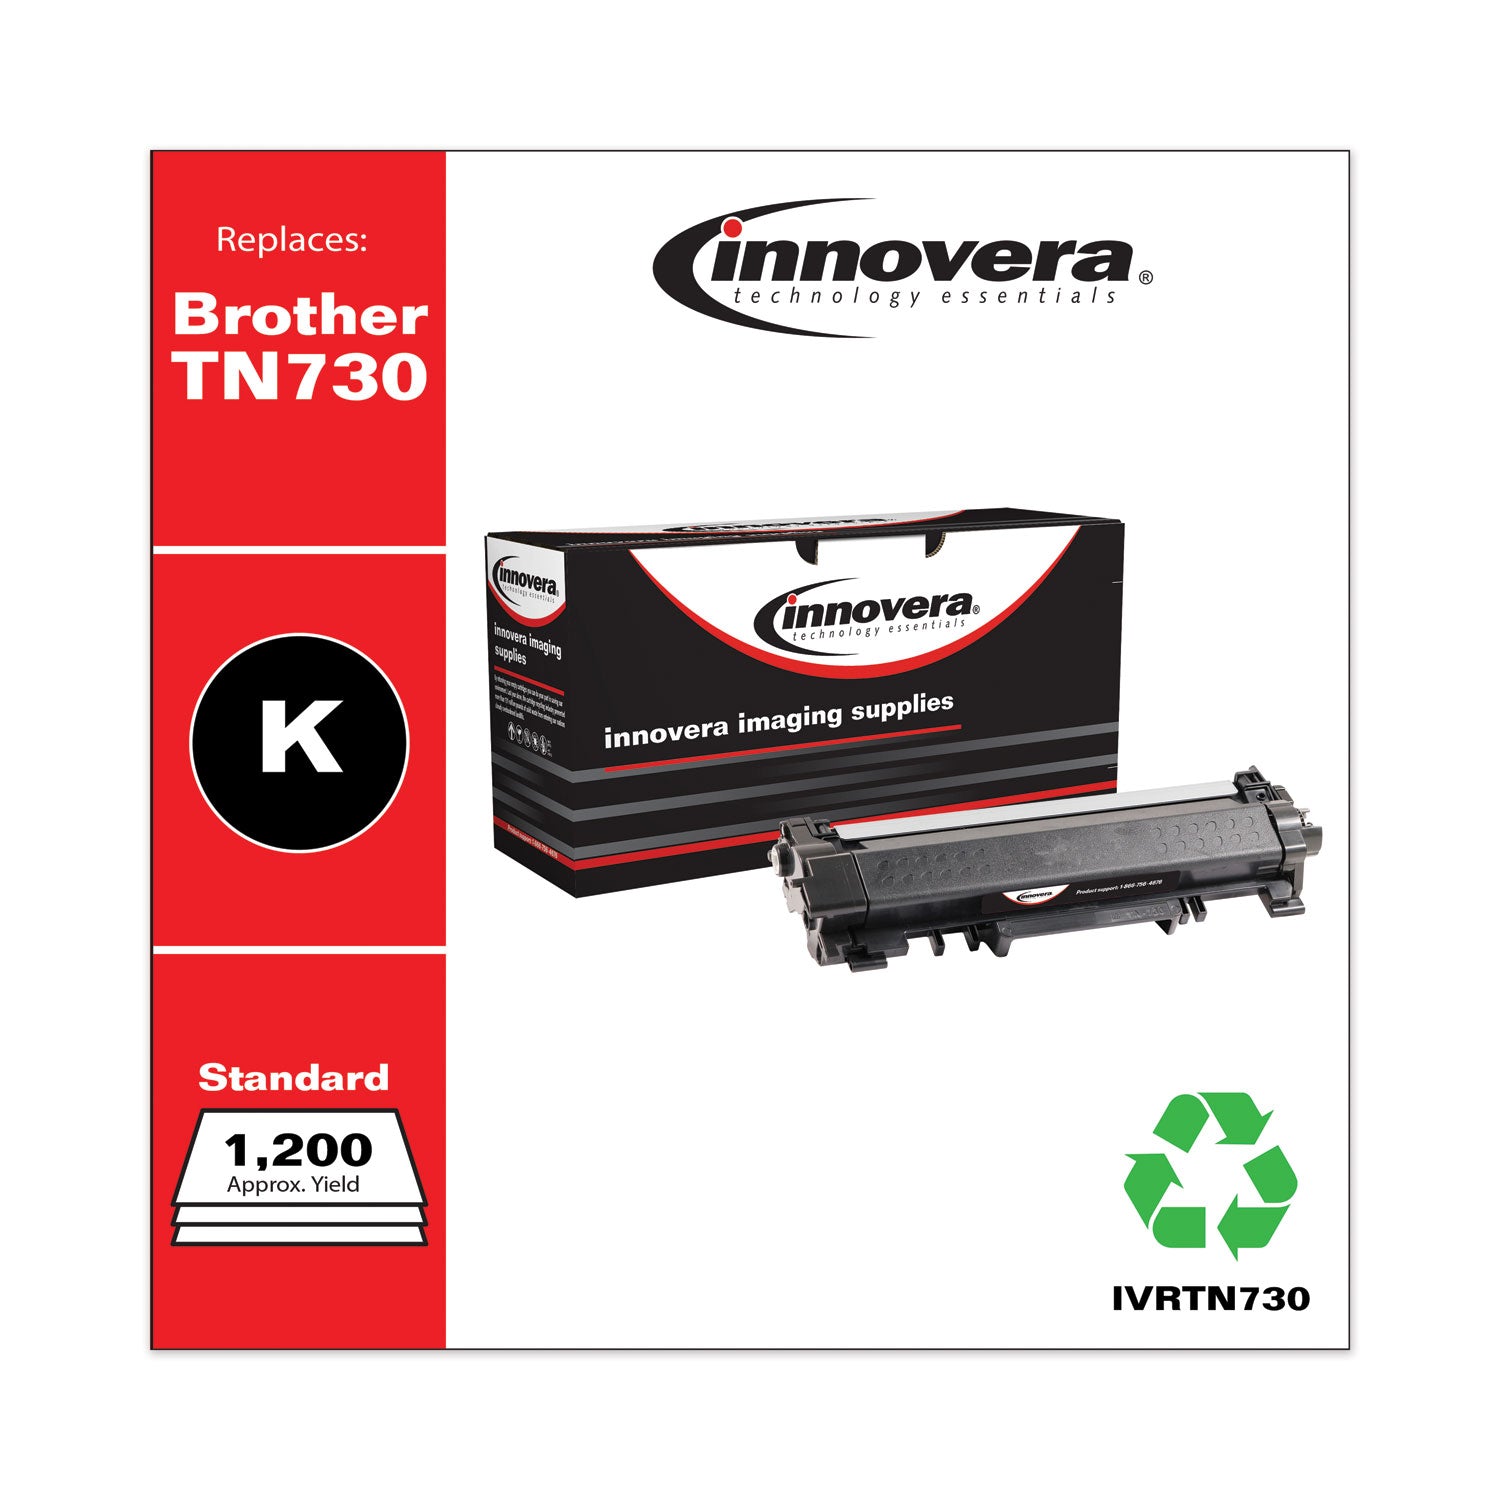 remanufactured-black-toner-replacement-for-tn730-1200-page-yield_ivrtn730 - 2